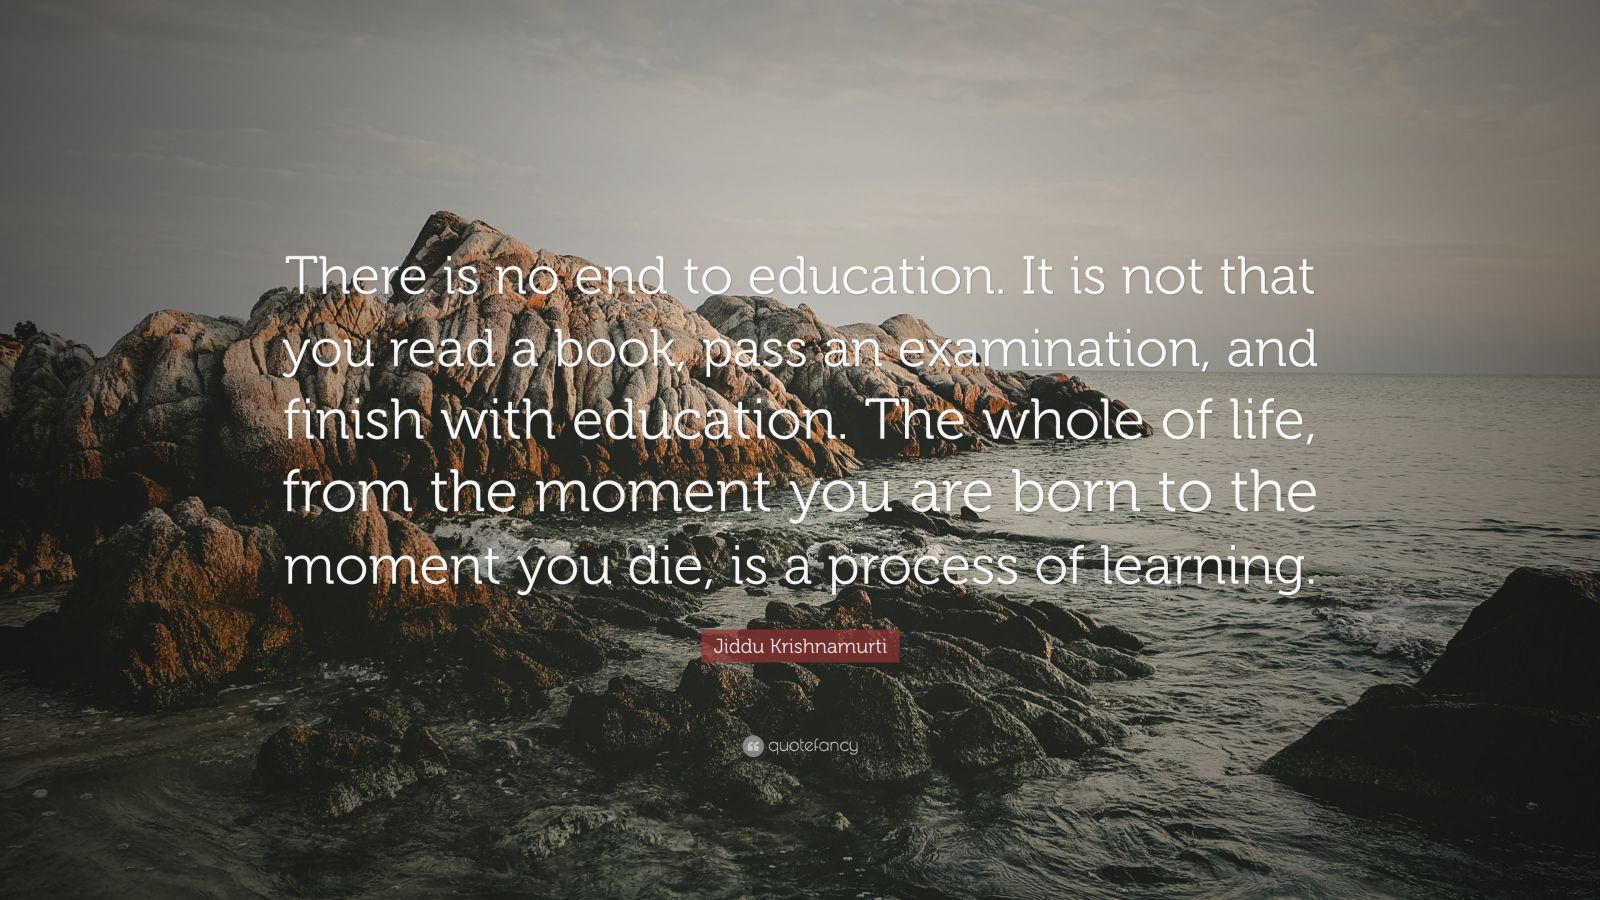 Jiddu Krishnamurti Quote: “There is no end to education. It is not that ...